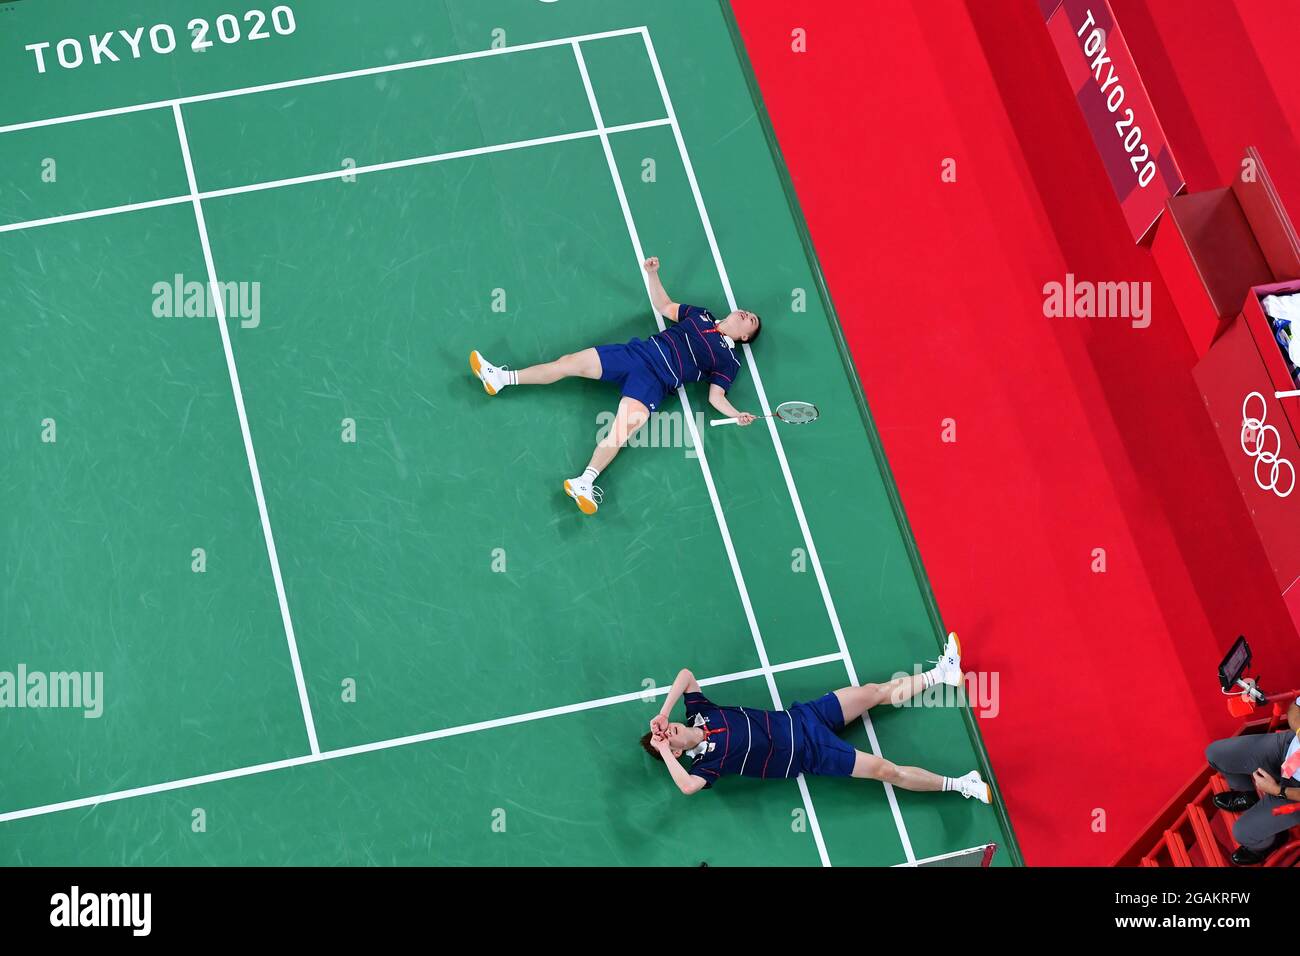 210731) -- TOKYO, July 31, 2021 (Xinhua) -- Malaysia's Aaron Chia (up) /Soh  Wooi Yik celebrate after winning the badminton men's doubles bronze medal  match at the Tokyo 2020 Olympic Games in